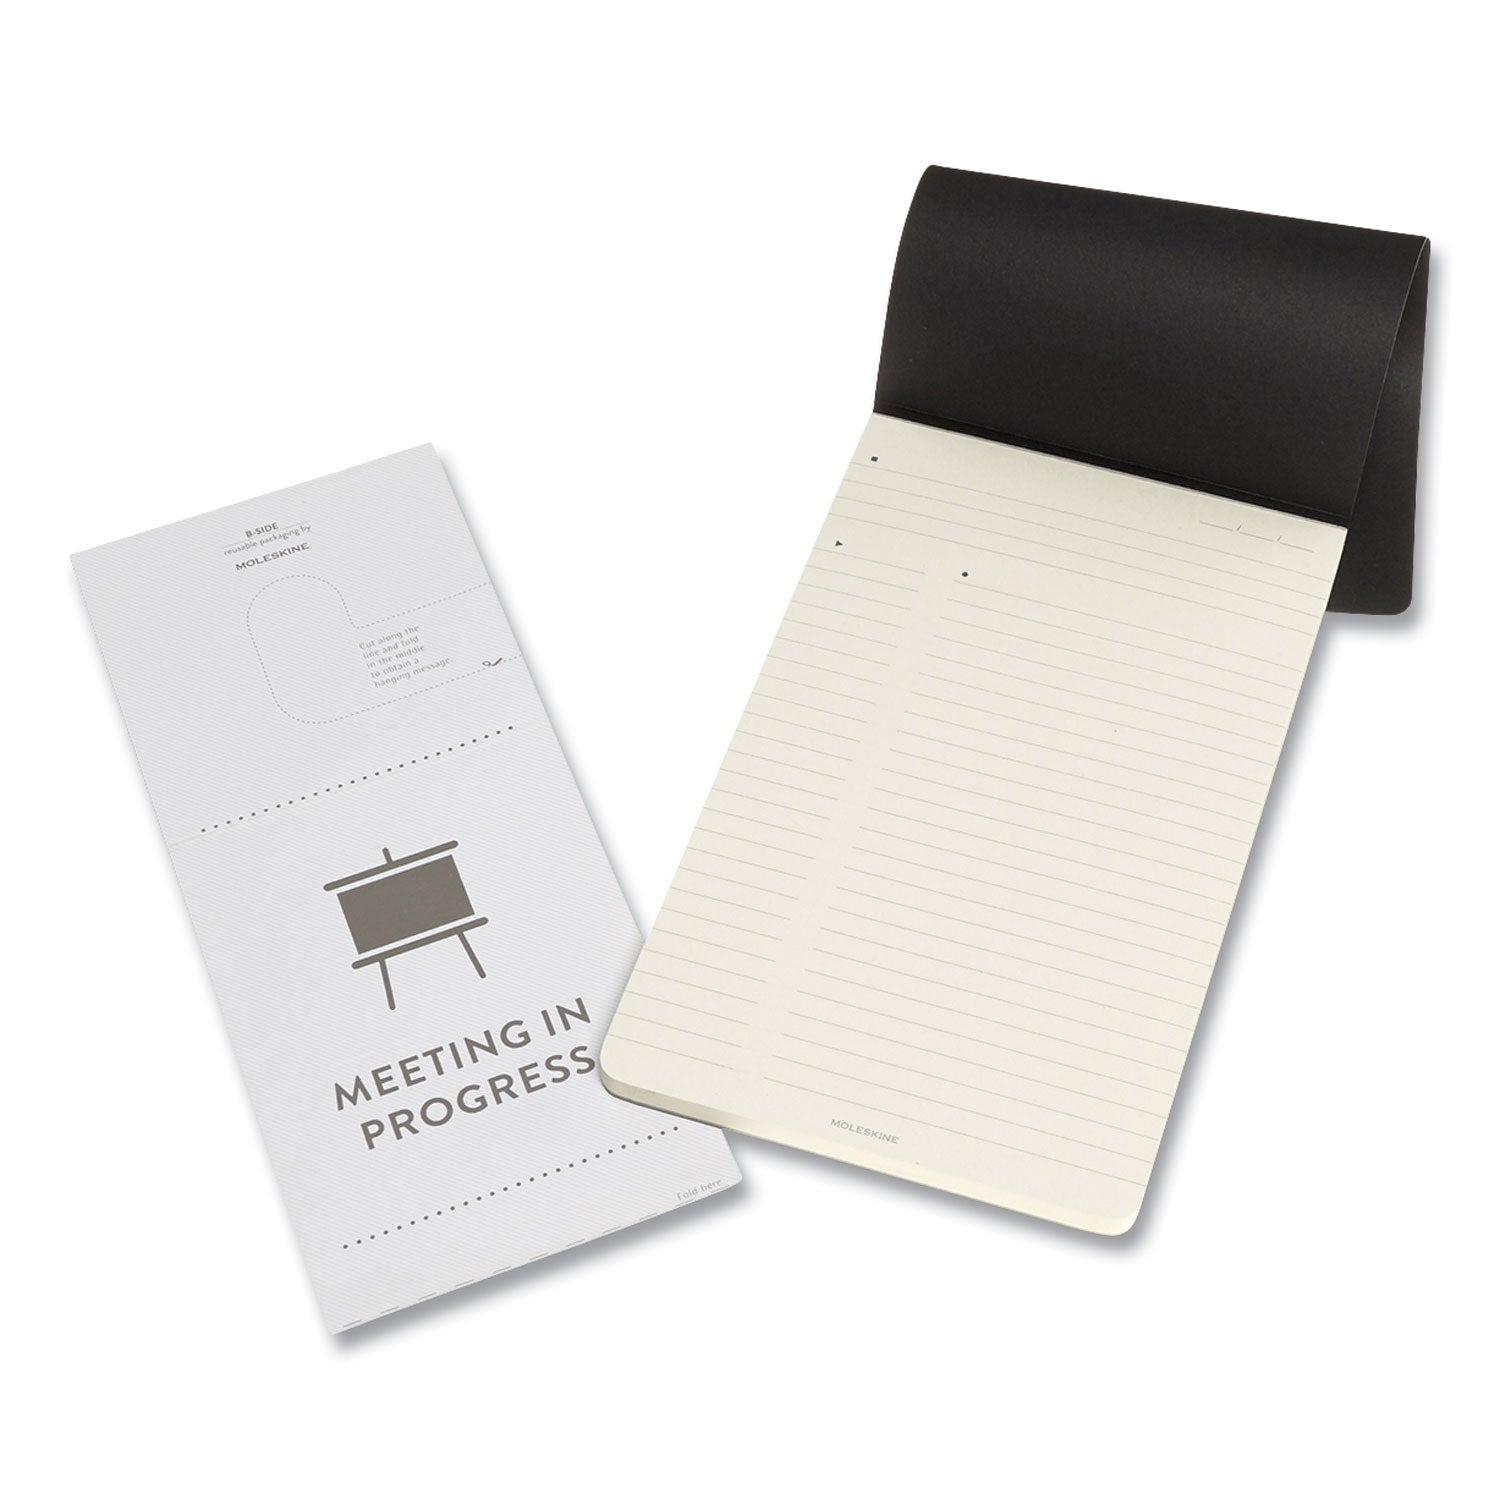 pro-pad-meeting-minutes-notes-format-black-cover-96-ivory-5-x-825-sheets_hbg620916 - 3